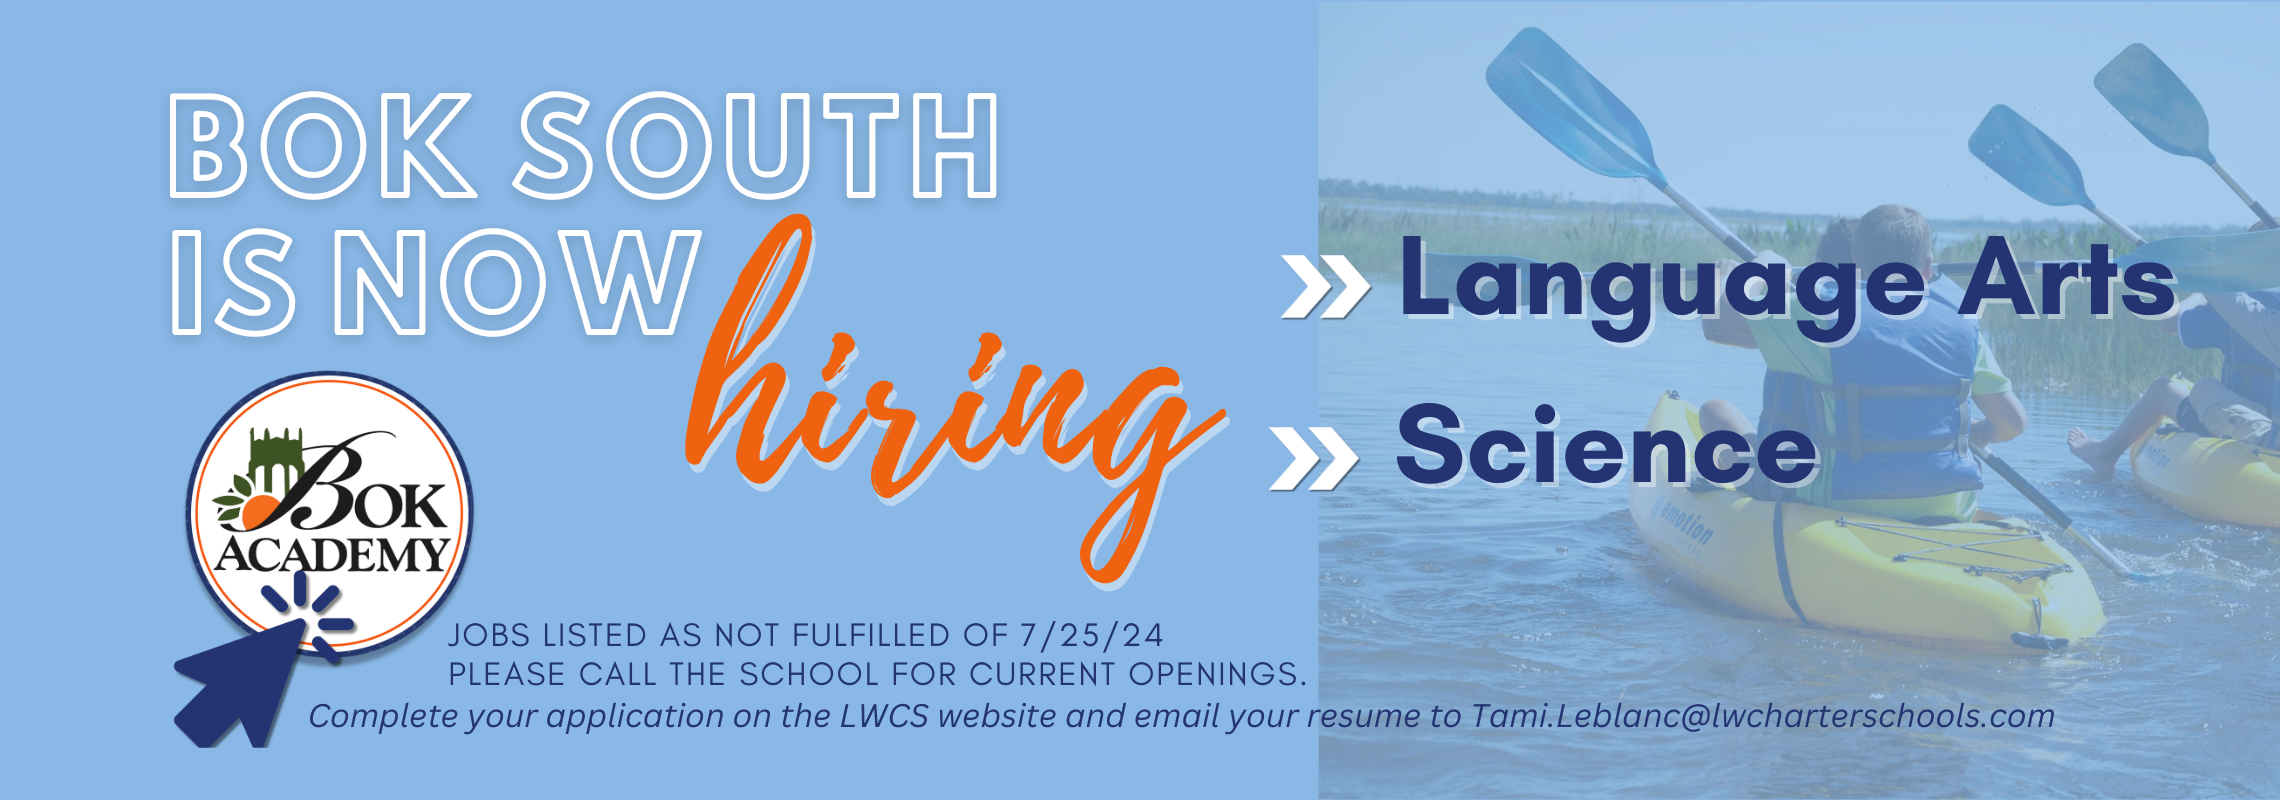 Hiring language arts and science, please call the office for more information